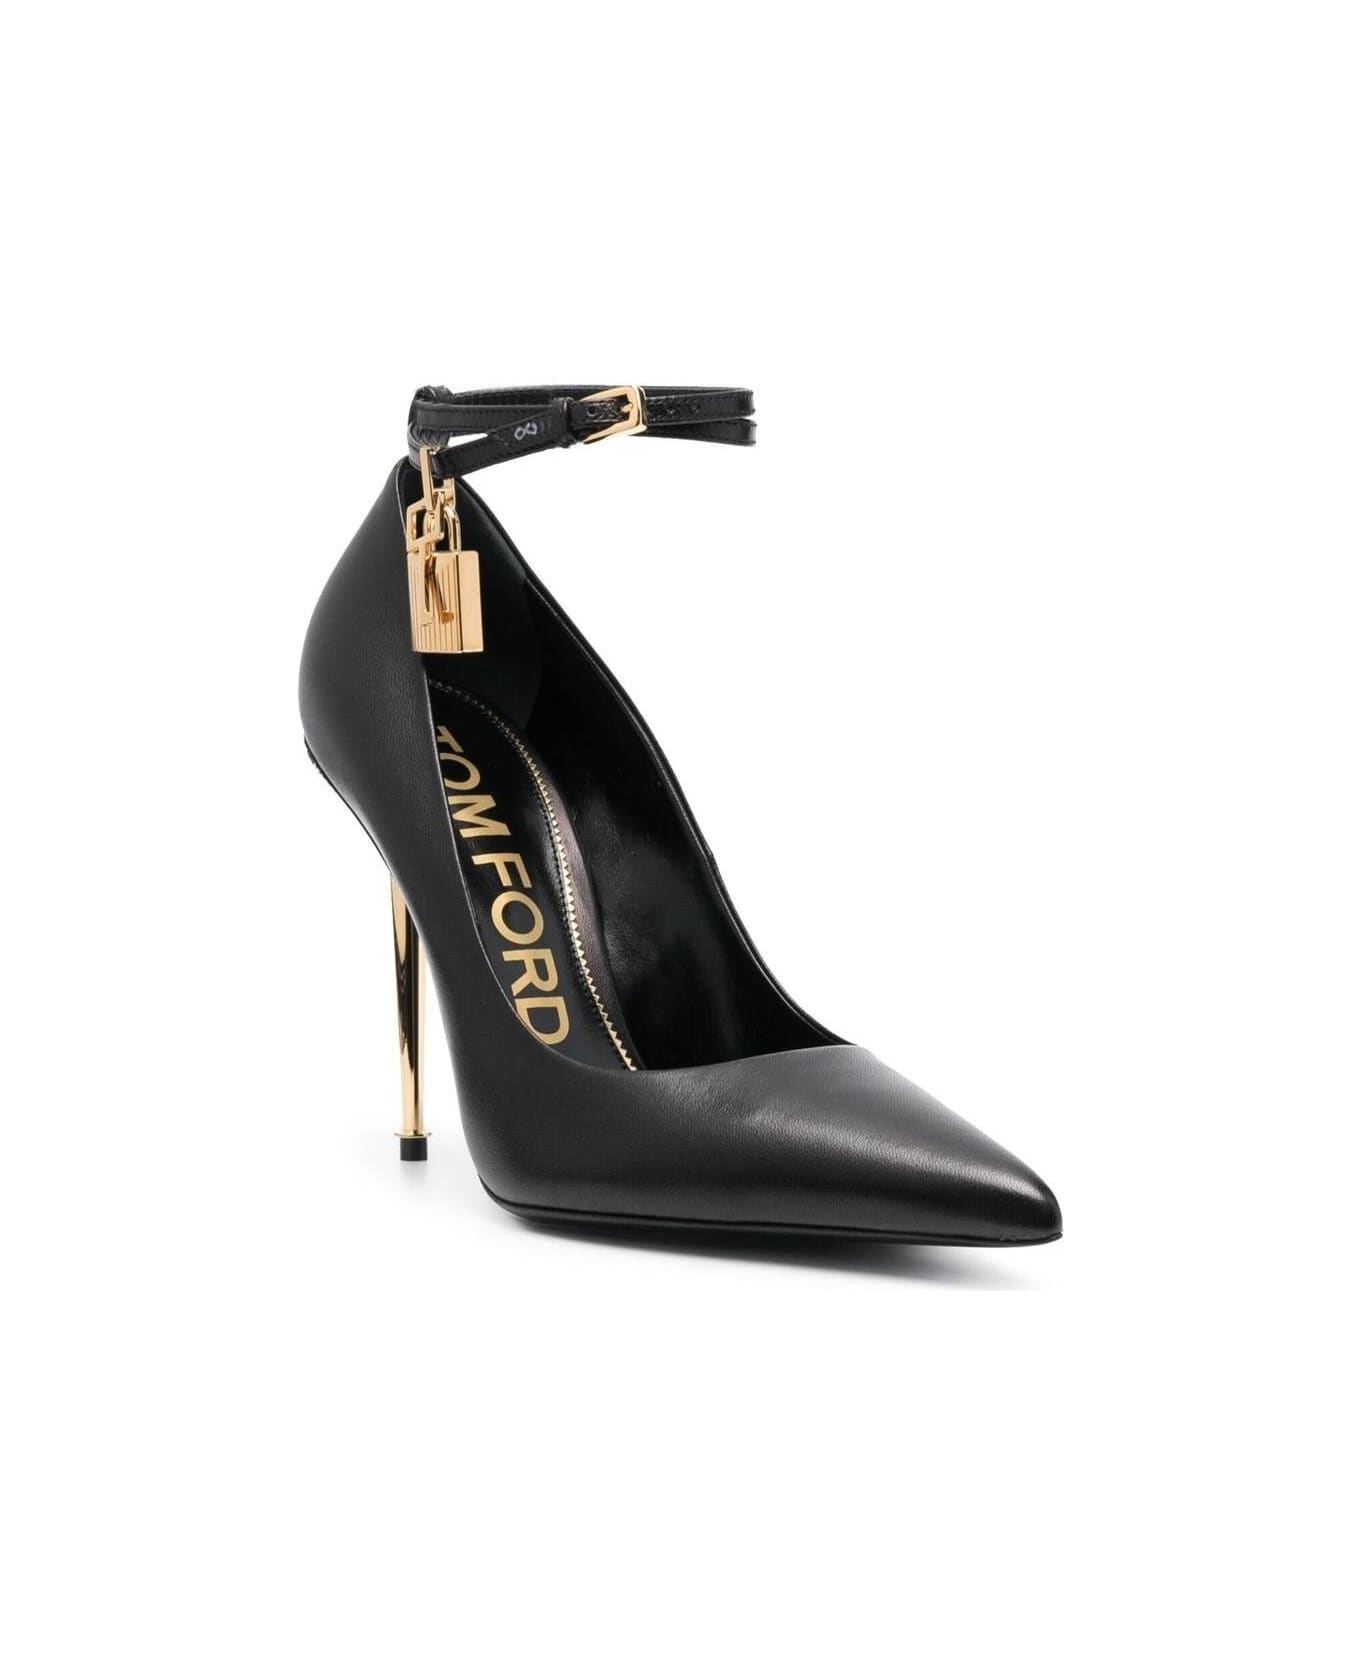 Tom Ford Black Pumps With Padlock Detail In Smooth Leather Woman - Black